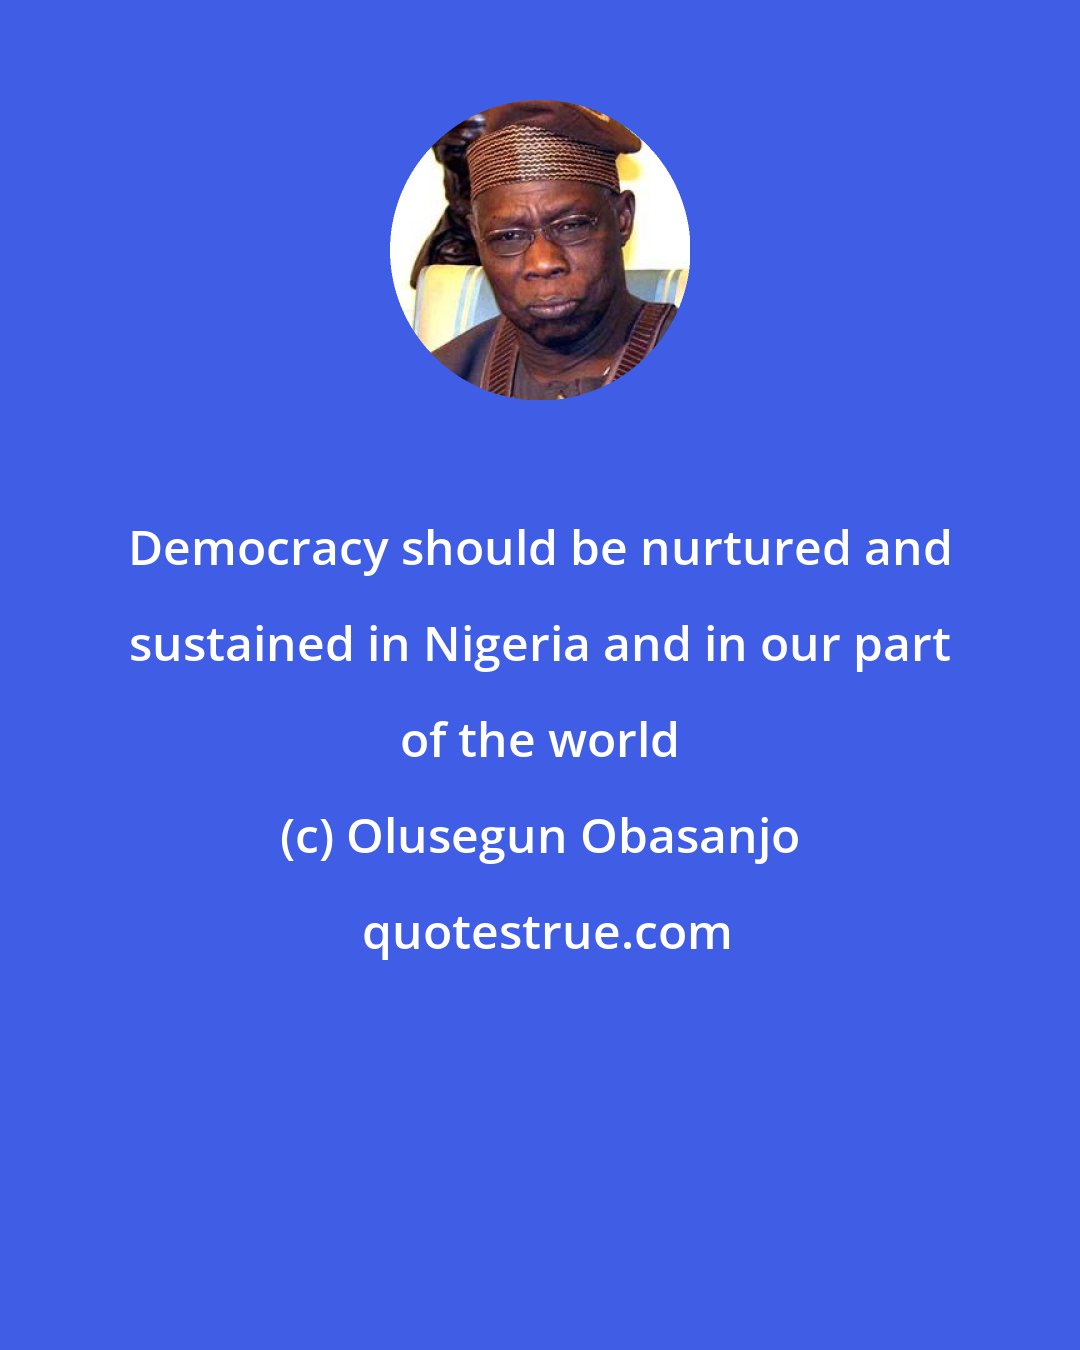 Olusegun Obasanjo: Democracy should be nurtured and sustained in Nigeria and in our part of the world